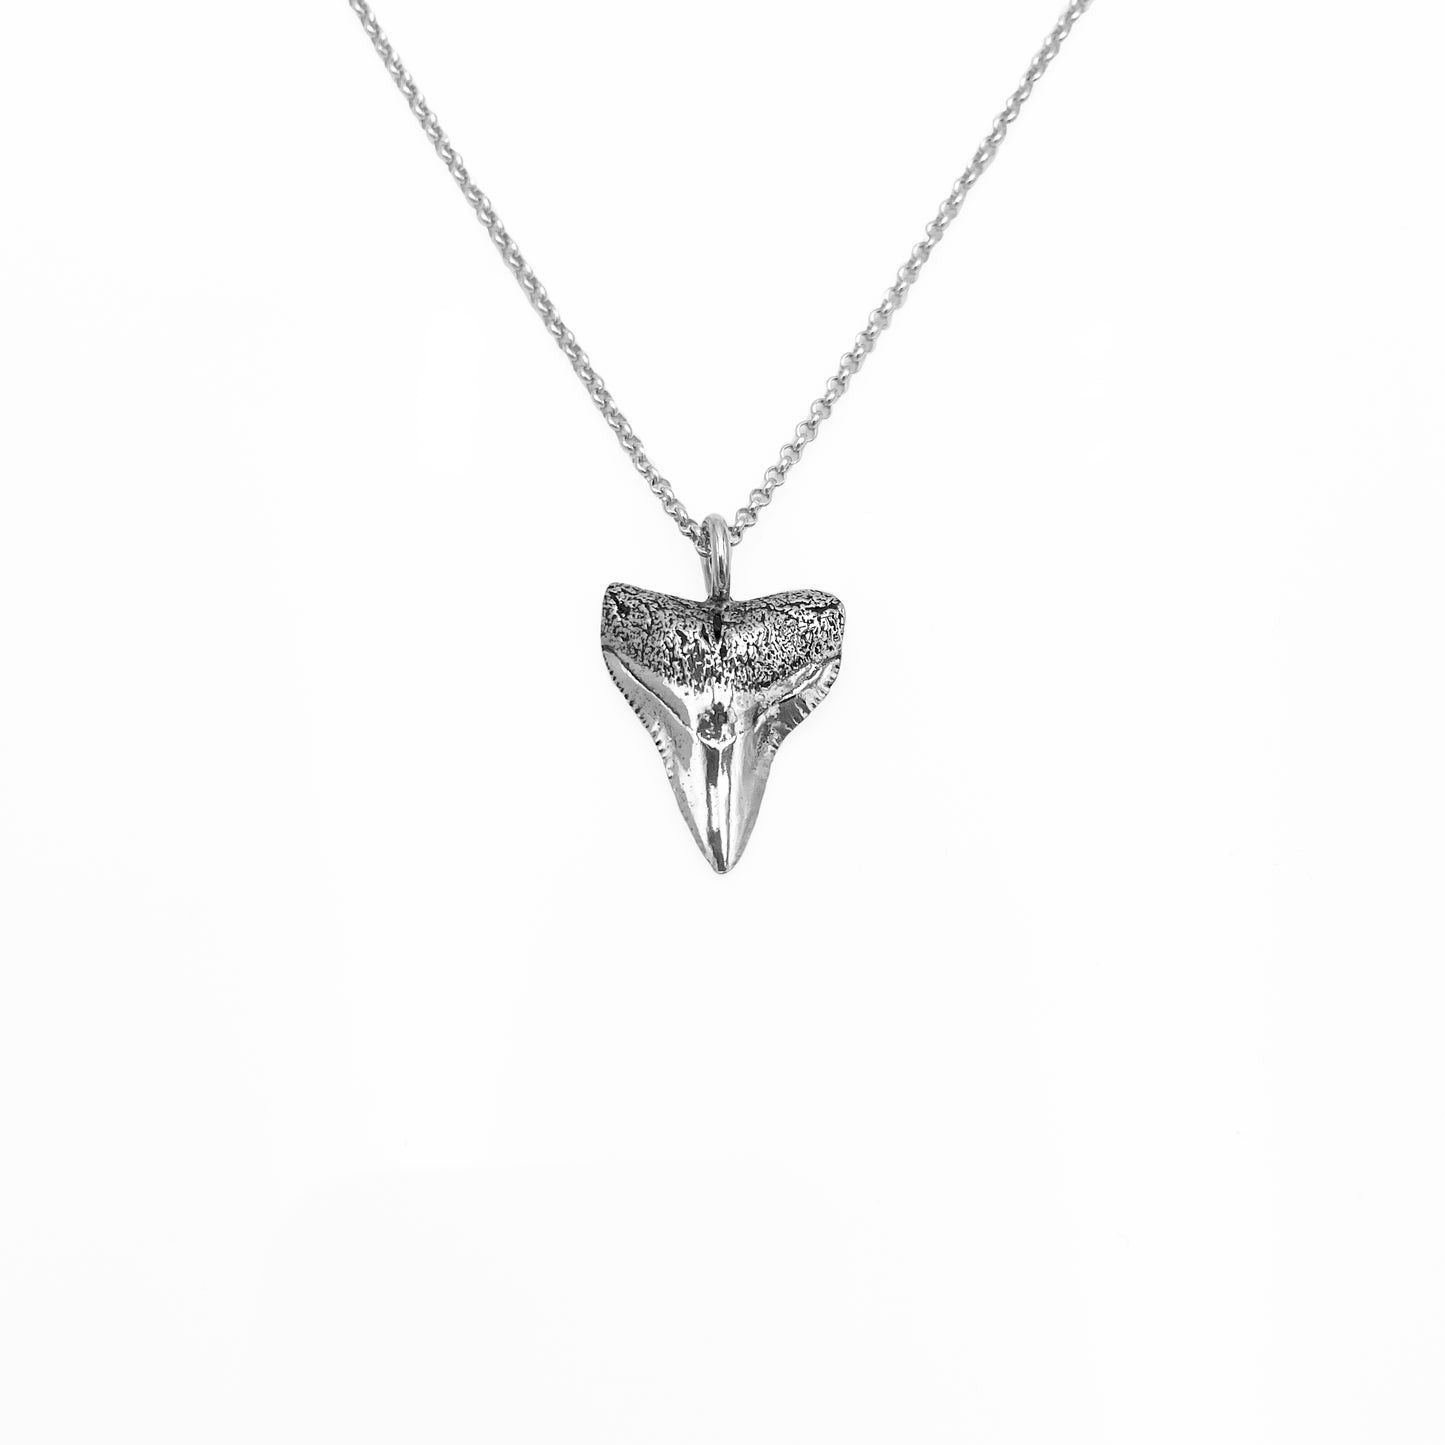 Bull Shark Tooth Necklace - Recycled Silver Shark Tooth Necklace - Gift for Him - Oxidized Silver Jewelry - Boyfriend Gift - Men Jewelry